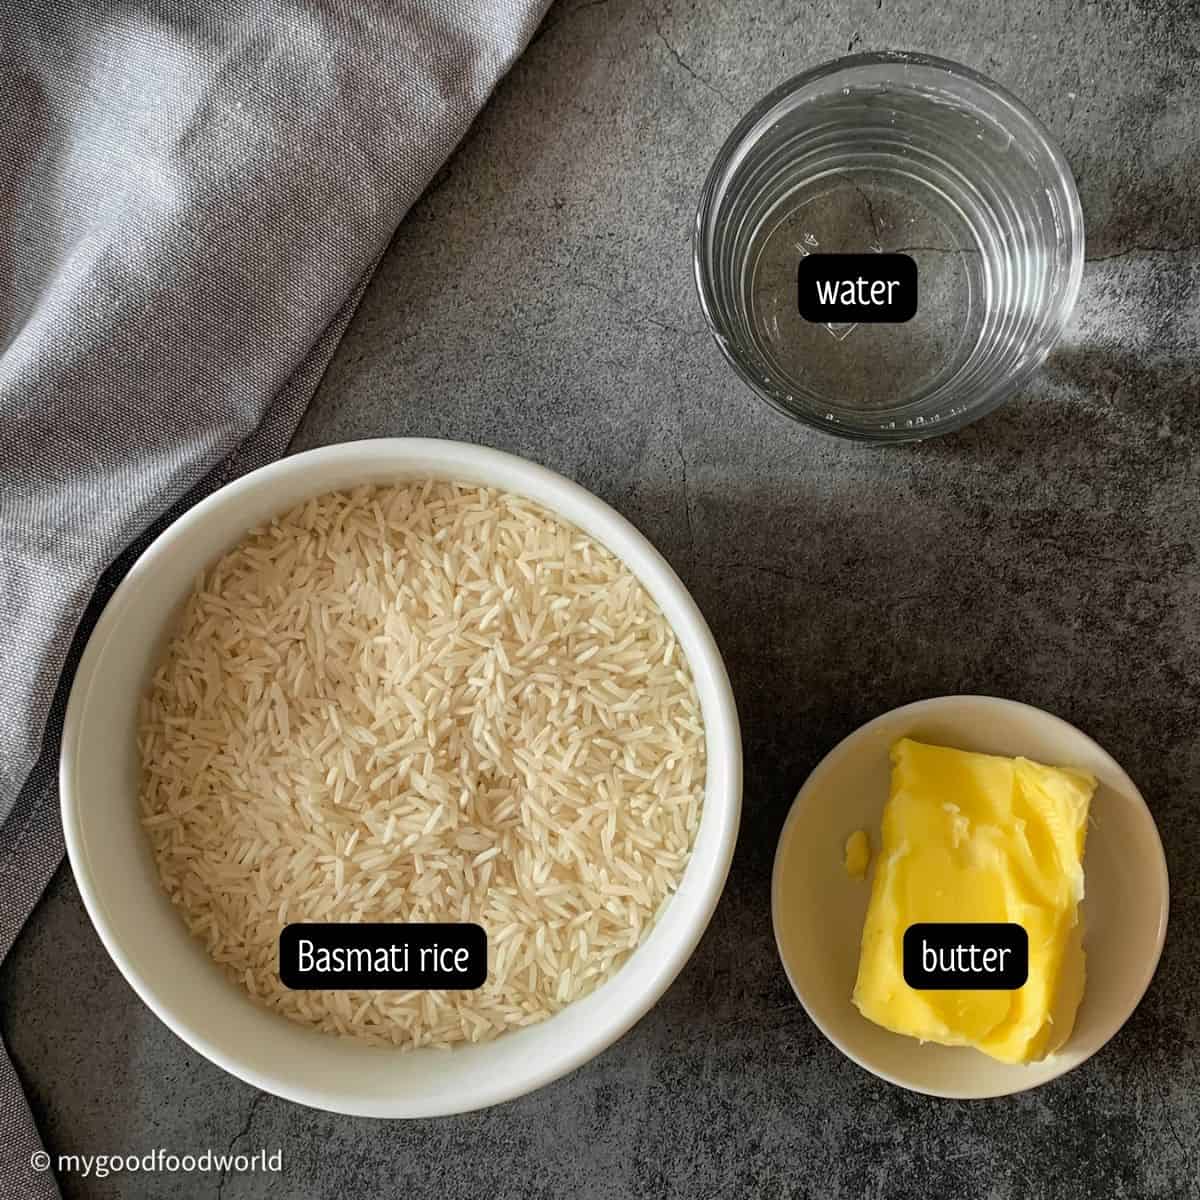 Some yellow butter, uncooked white rice, and some water are placed in bowls next to each other on a dark grey backdrop.